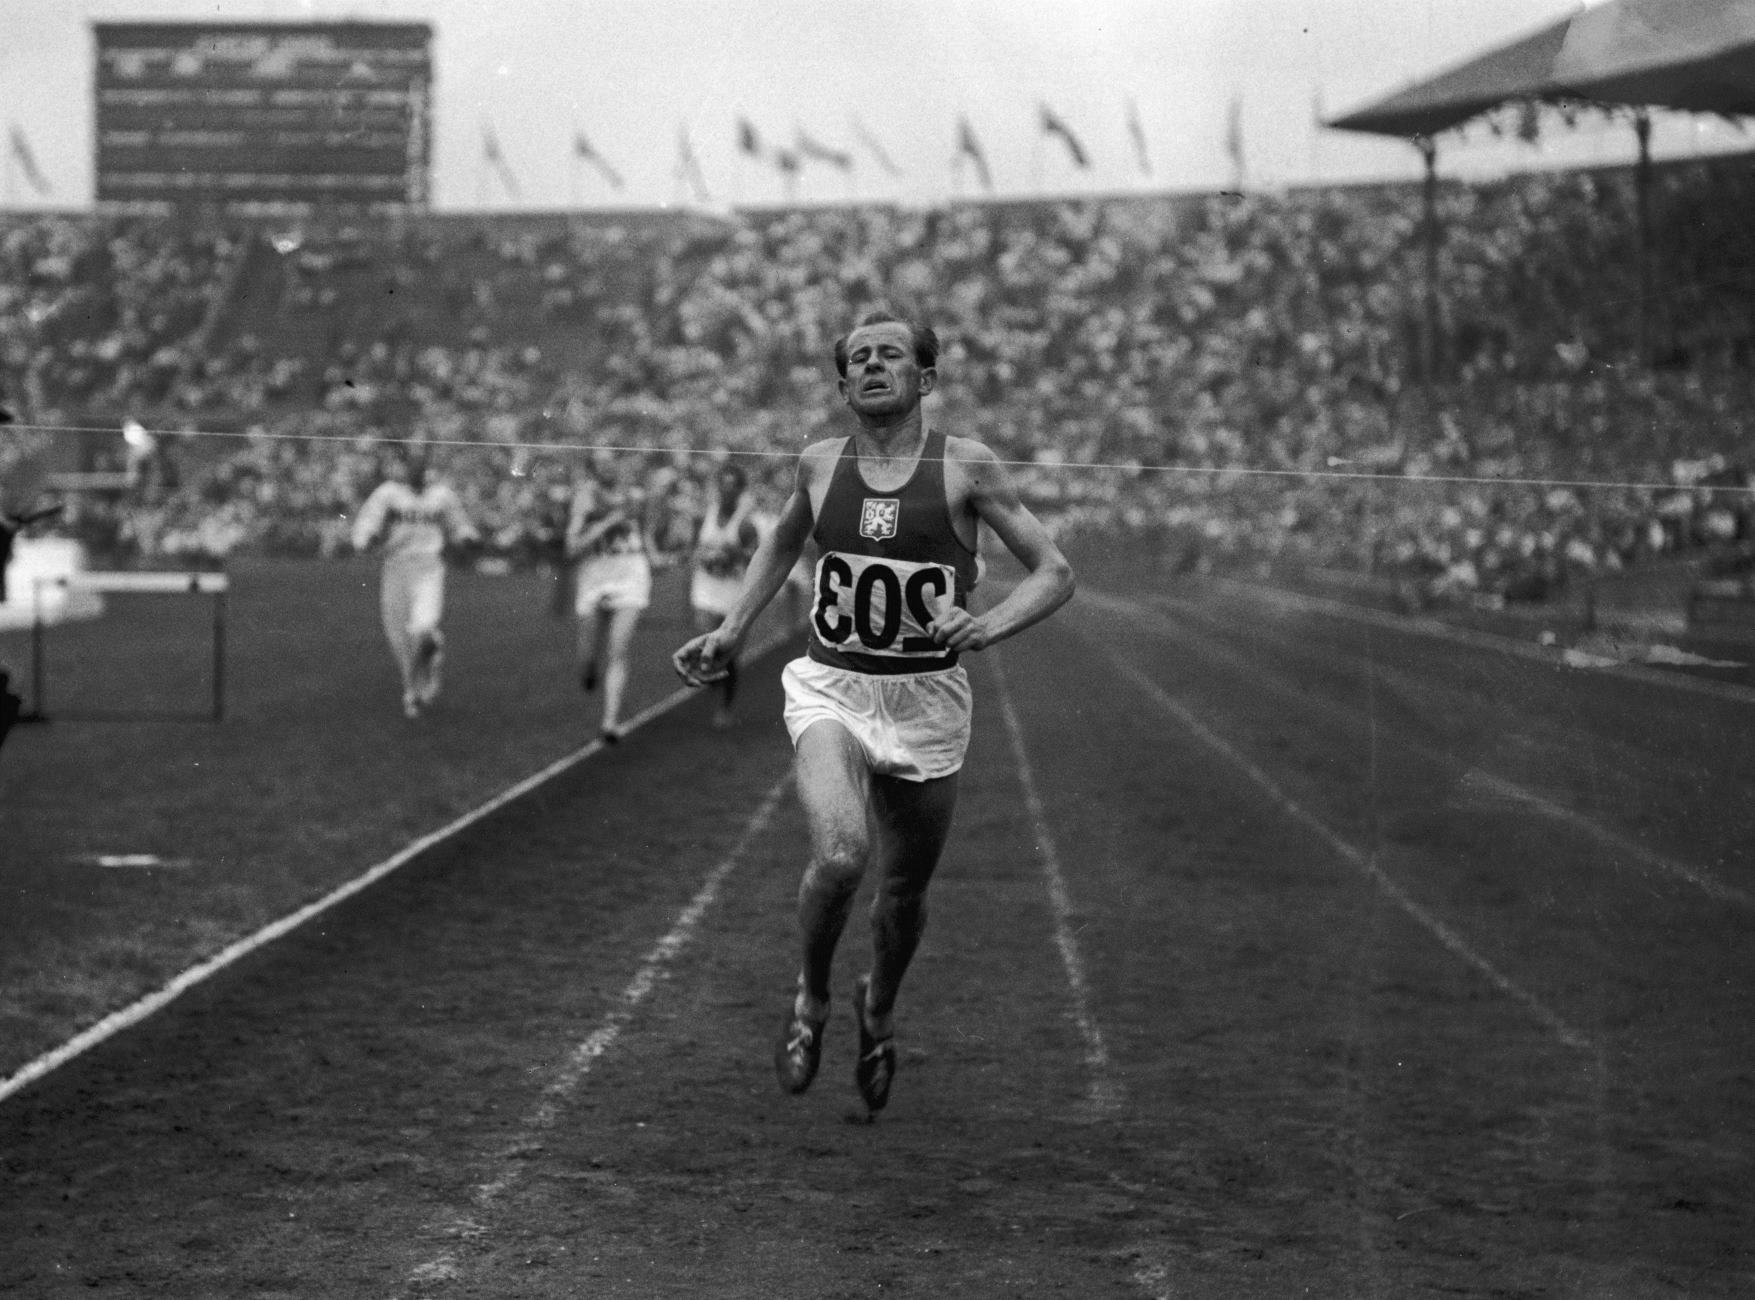 Emil Zátopek: A Game-Changer In The World Of Running